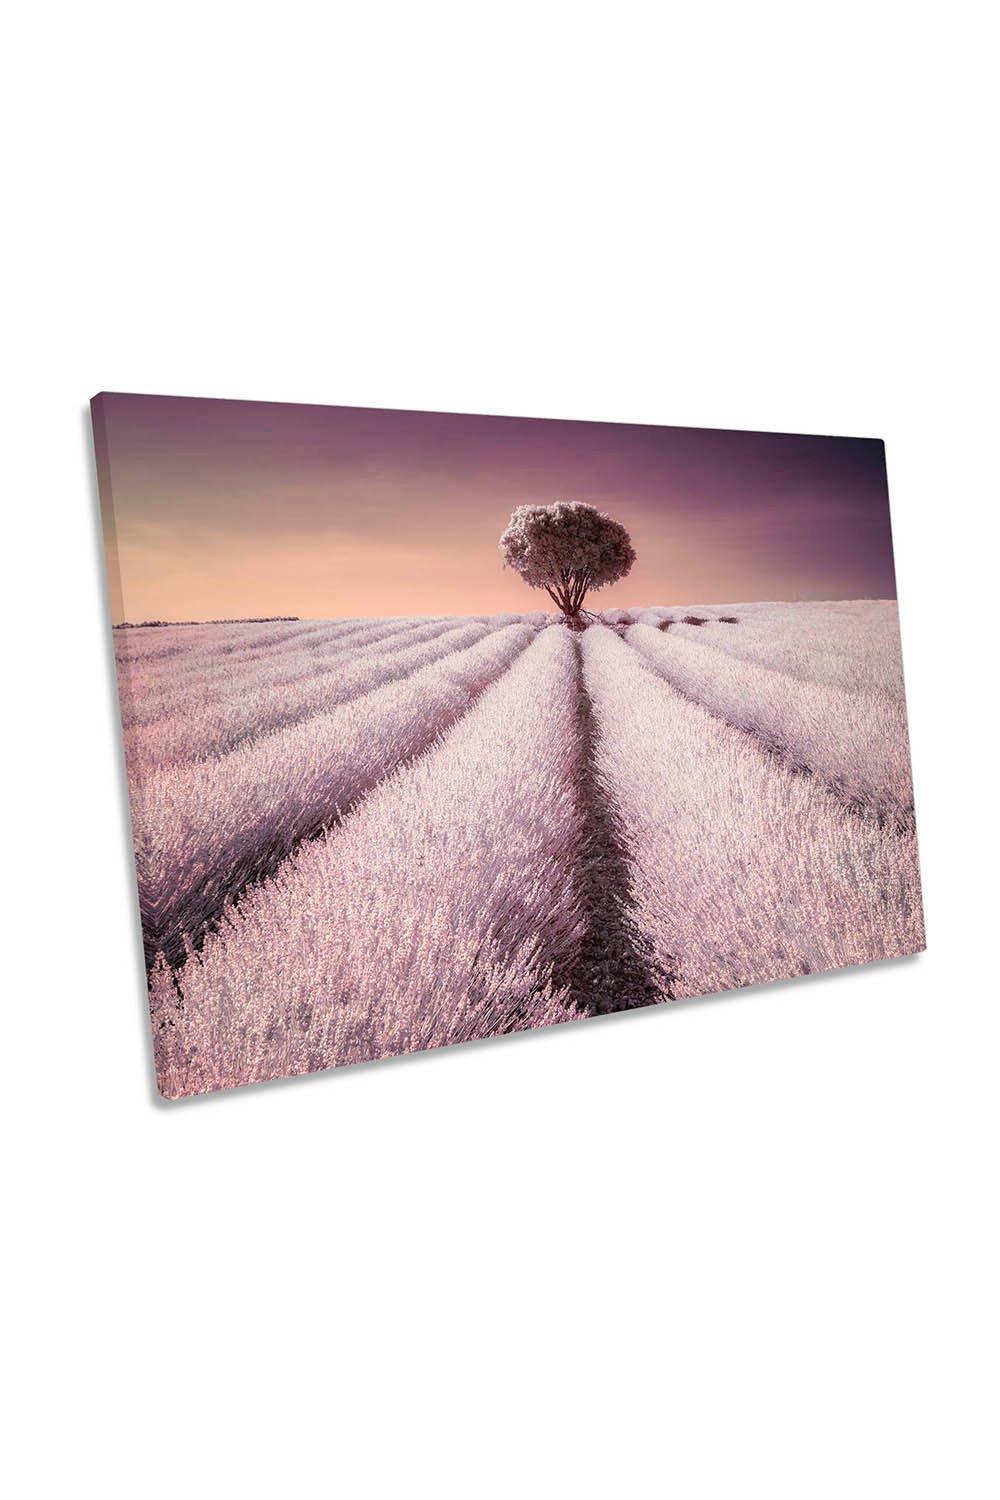 Pink Lavender Sunset Field Tree Landscape Canvas Wall Art Picture Print